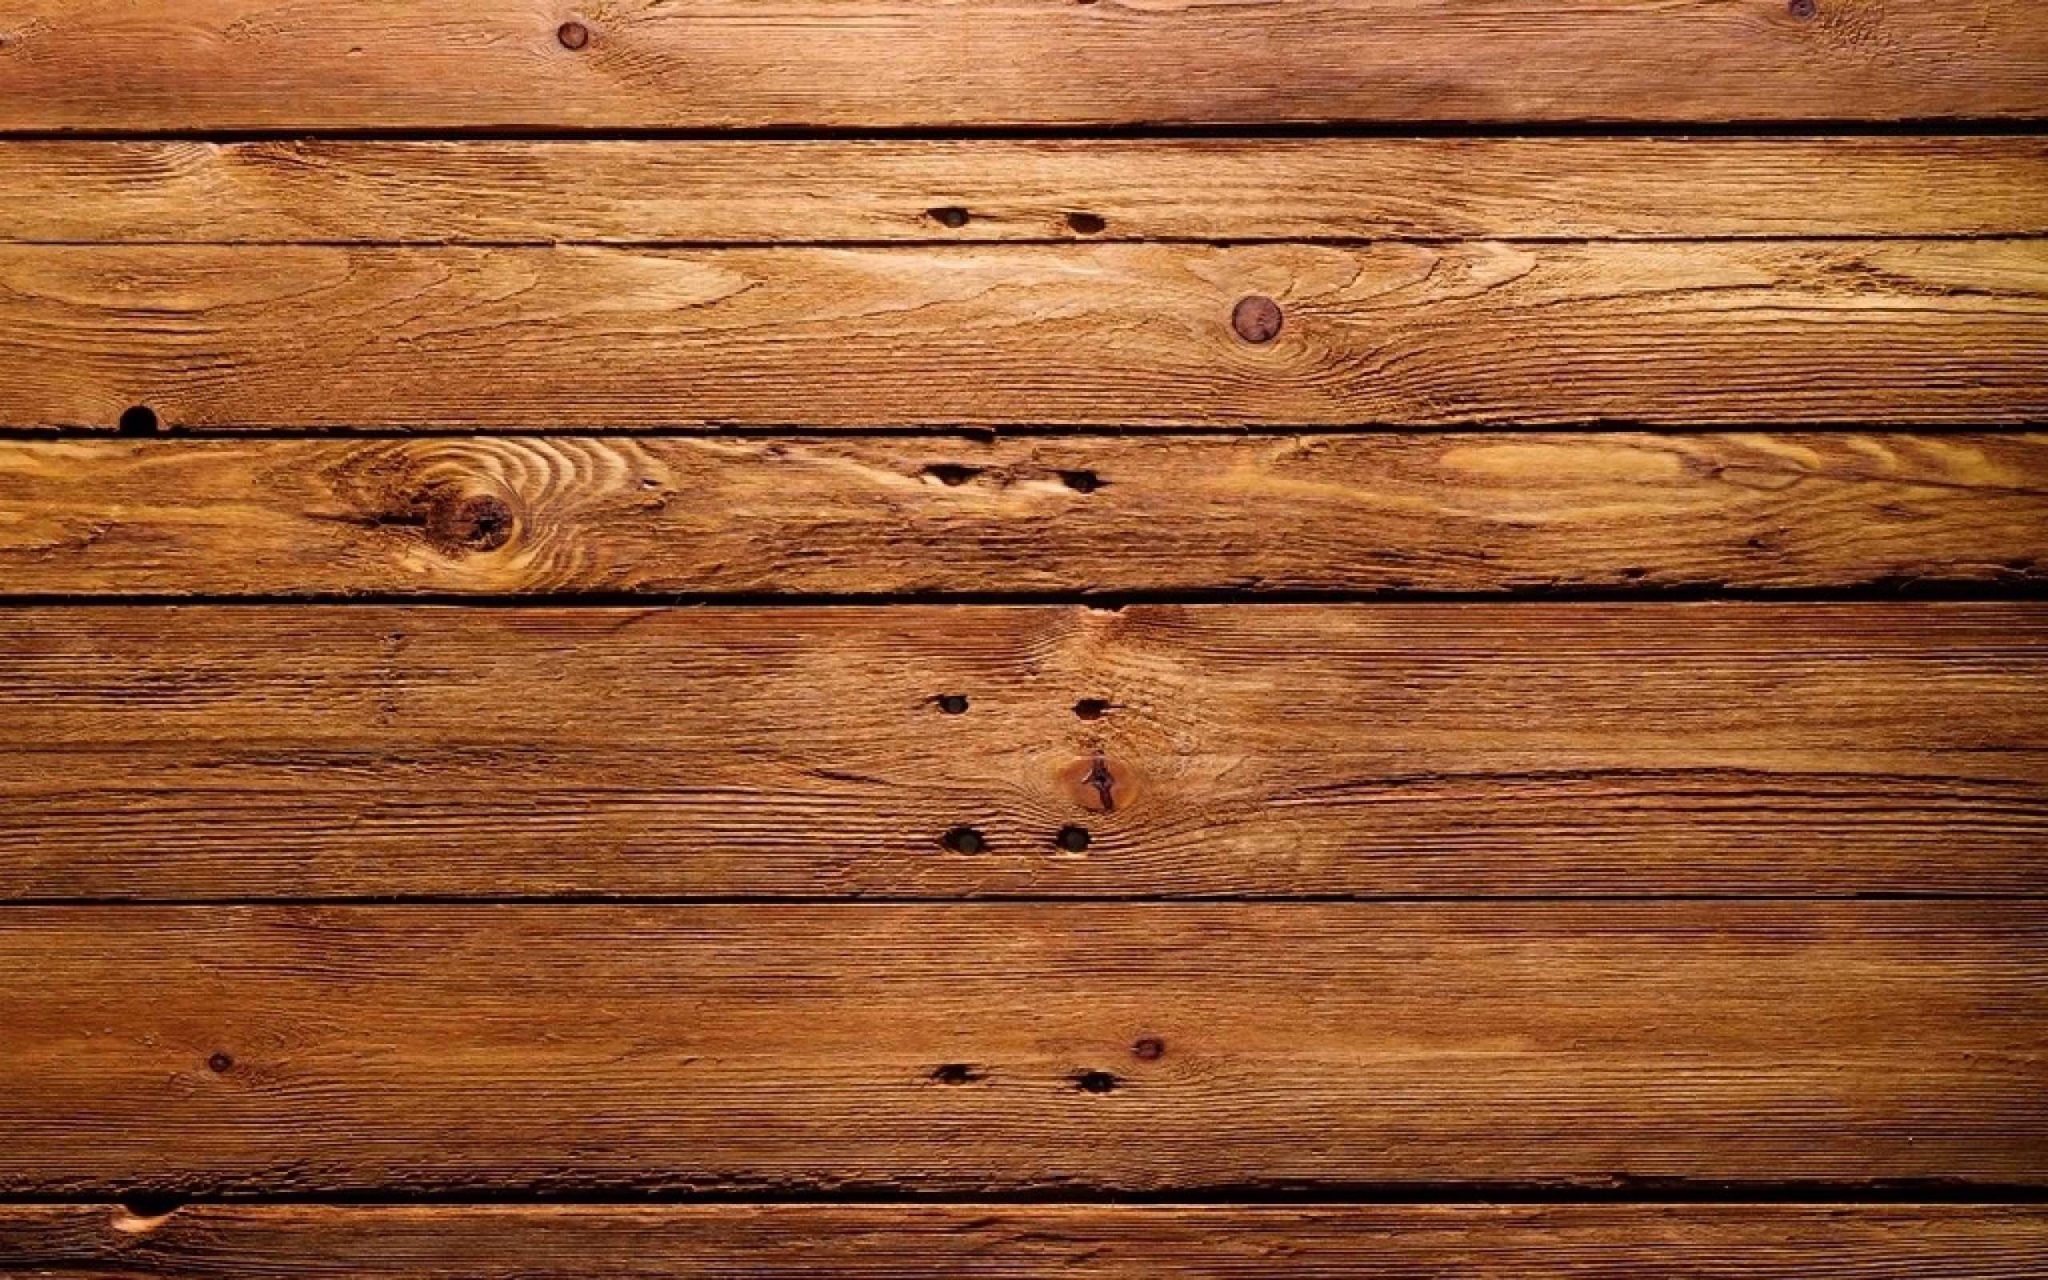 Trees-Wood-Patterns-Textures-Backgrounds.jpg